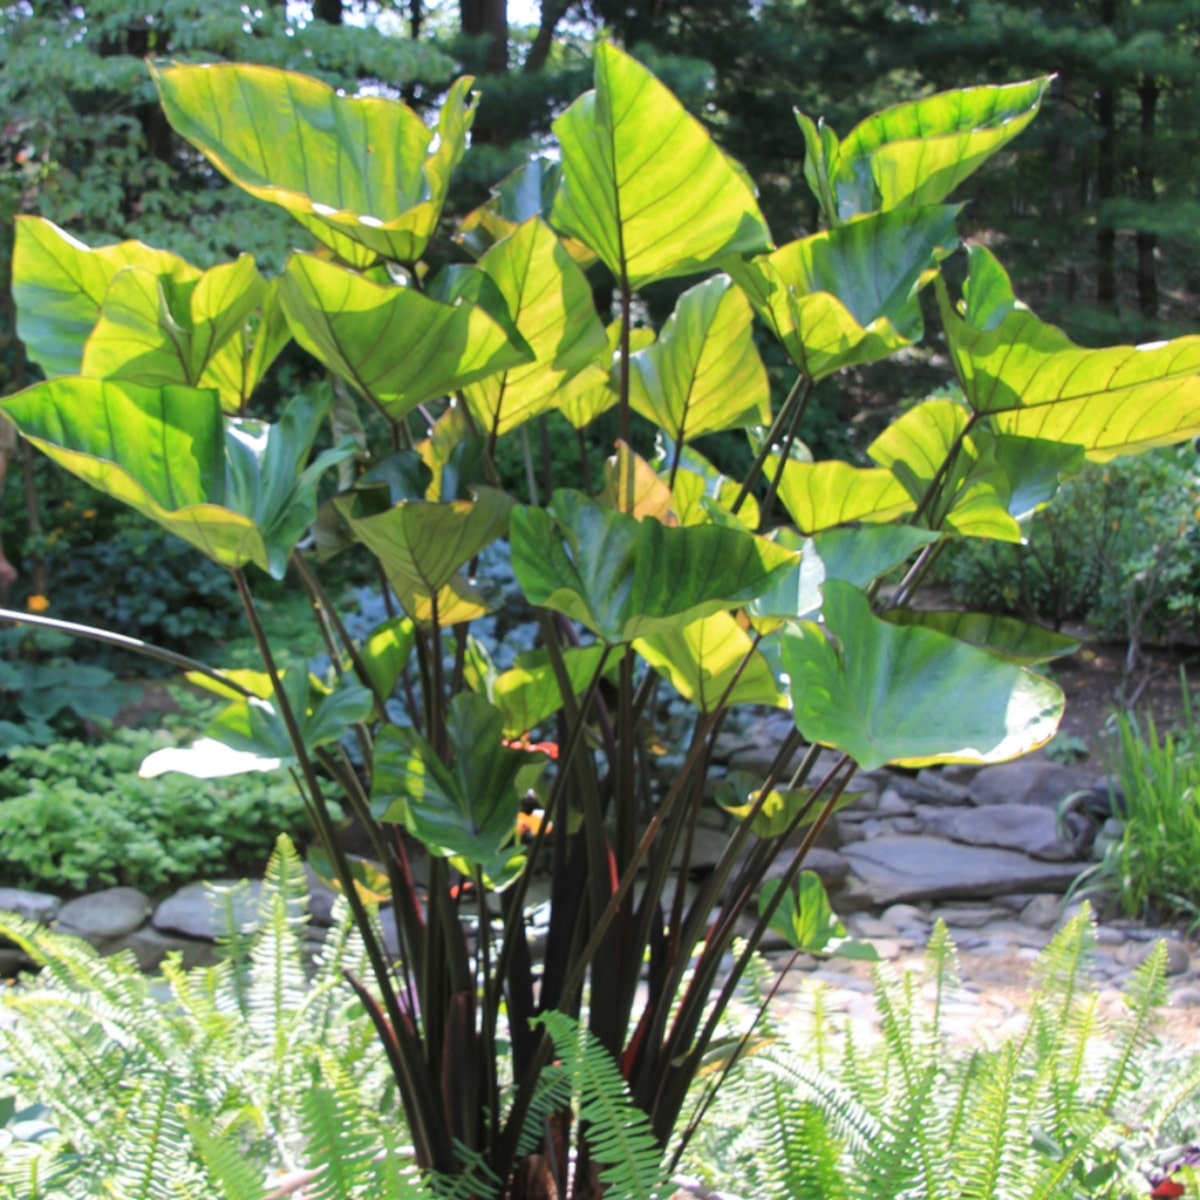 The Colocasia teacup has green leaves